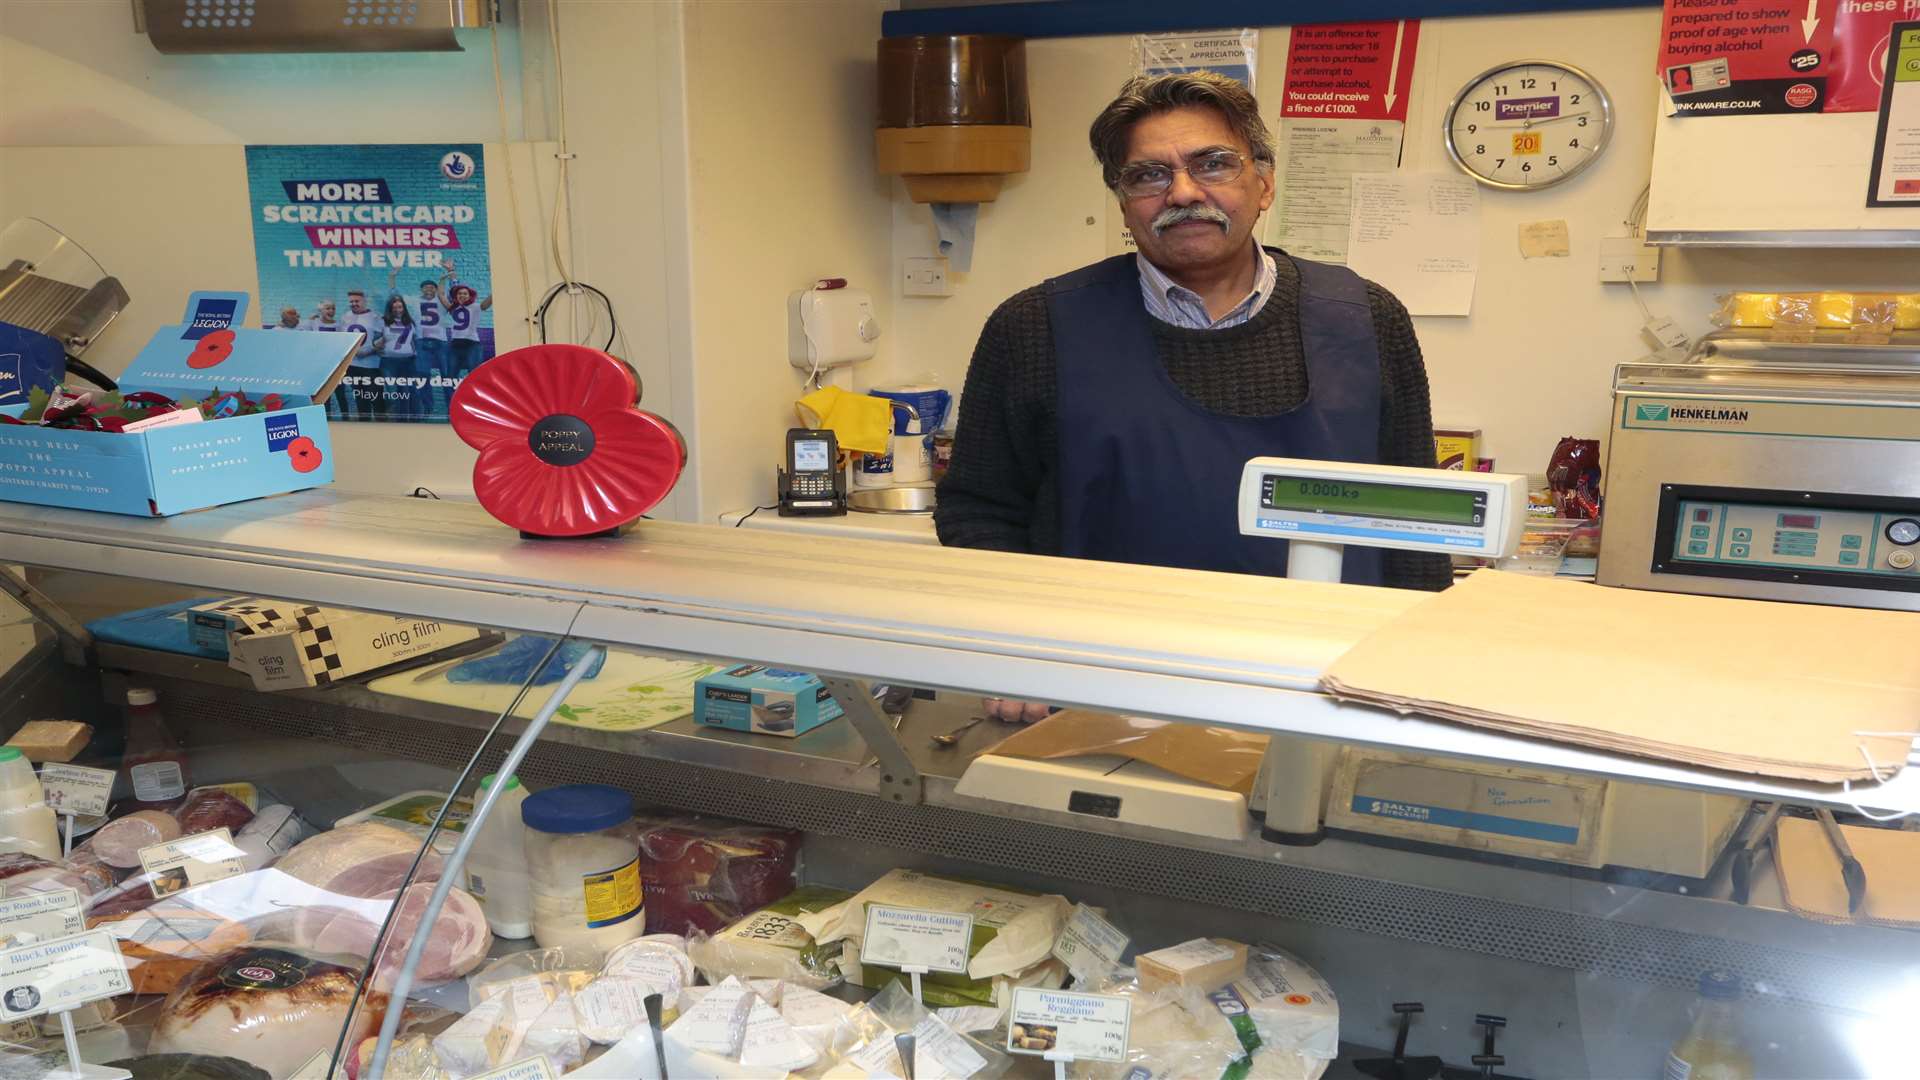 Charan Athwal and the machine that vacuum packs meat which has been deemed dangerous by hygiene inspectors